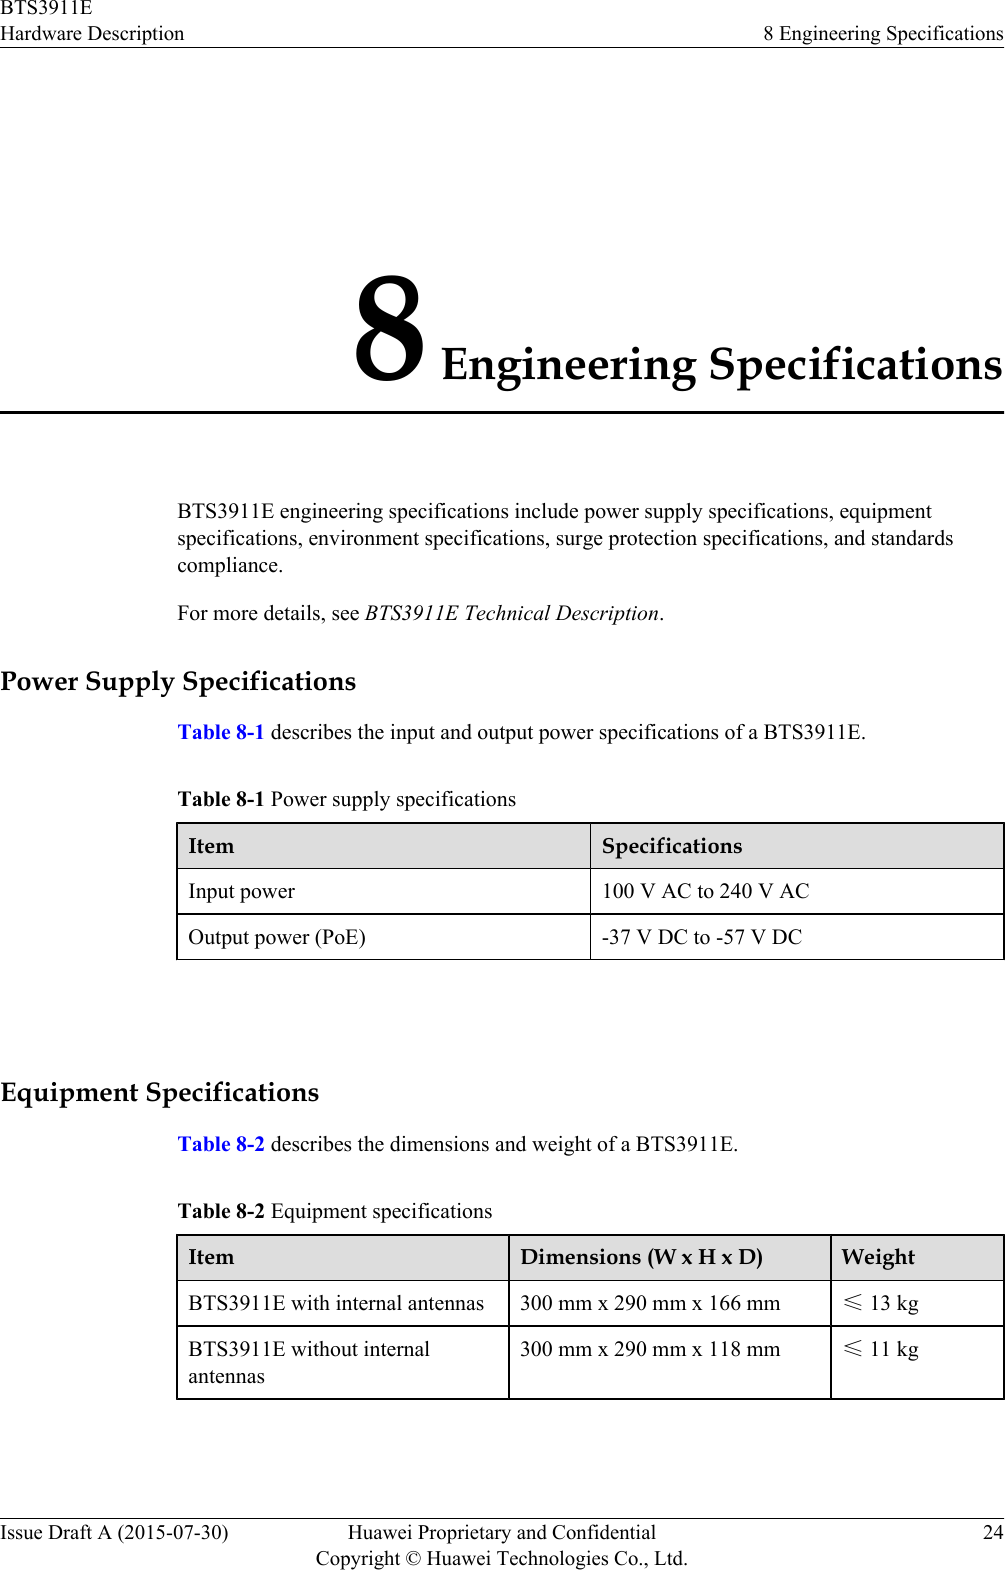 8 Engineering SpecificationsBTS3911E engineering specifications include power supply specifications, equipmentspecifications, environment specifications, surge protection specifications, and standardscompliance.For more details, see BTS3911E Technical Description.Power Supply SpecificationsTable 8-1 describes the input and output power specifications of a BTS3911E.Table 8-1 Power supply specificationsItem SpecificationsInput power 100 V AC to 240 V ACOutput power (PoE) -37 V DC to -57 V DC Equipment SpecificationsTable 8-2 describes the dimensions and weight of a BTS3911E.Table 8-2 Equipment specificationsItem Dimensions (W x H x D) WeightBTS3911E with internal antennas 300 mm x 290 mm x 166 mm ≤ 13 kgBTS3911E without internalantennas300 mm x 290 mm x 118 mm ≤ 11 kg BTS3911EHardware Description 8 Engineering SpecificationsIssue Draft A (2015-07-30) Huawei Proprietary and ConfidentialCopyright © Huawei Technologies Co., Ltd.24